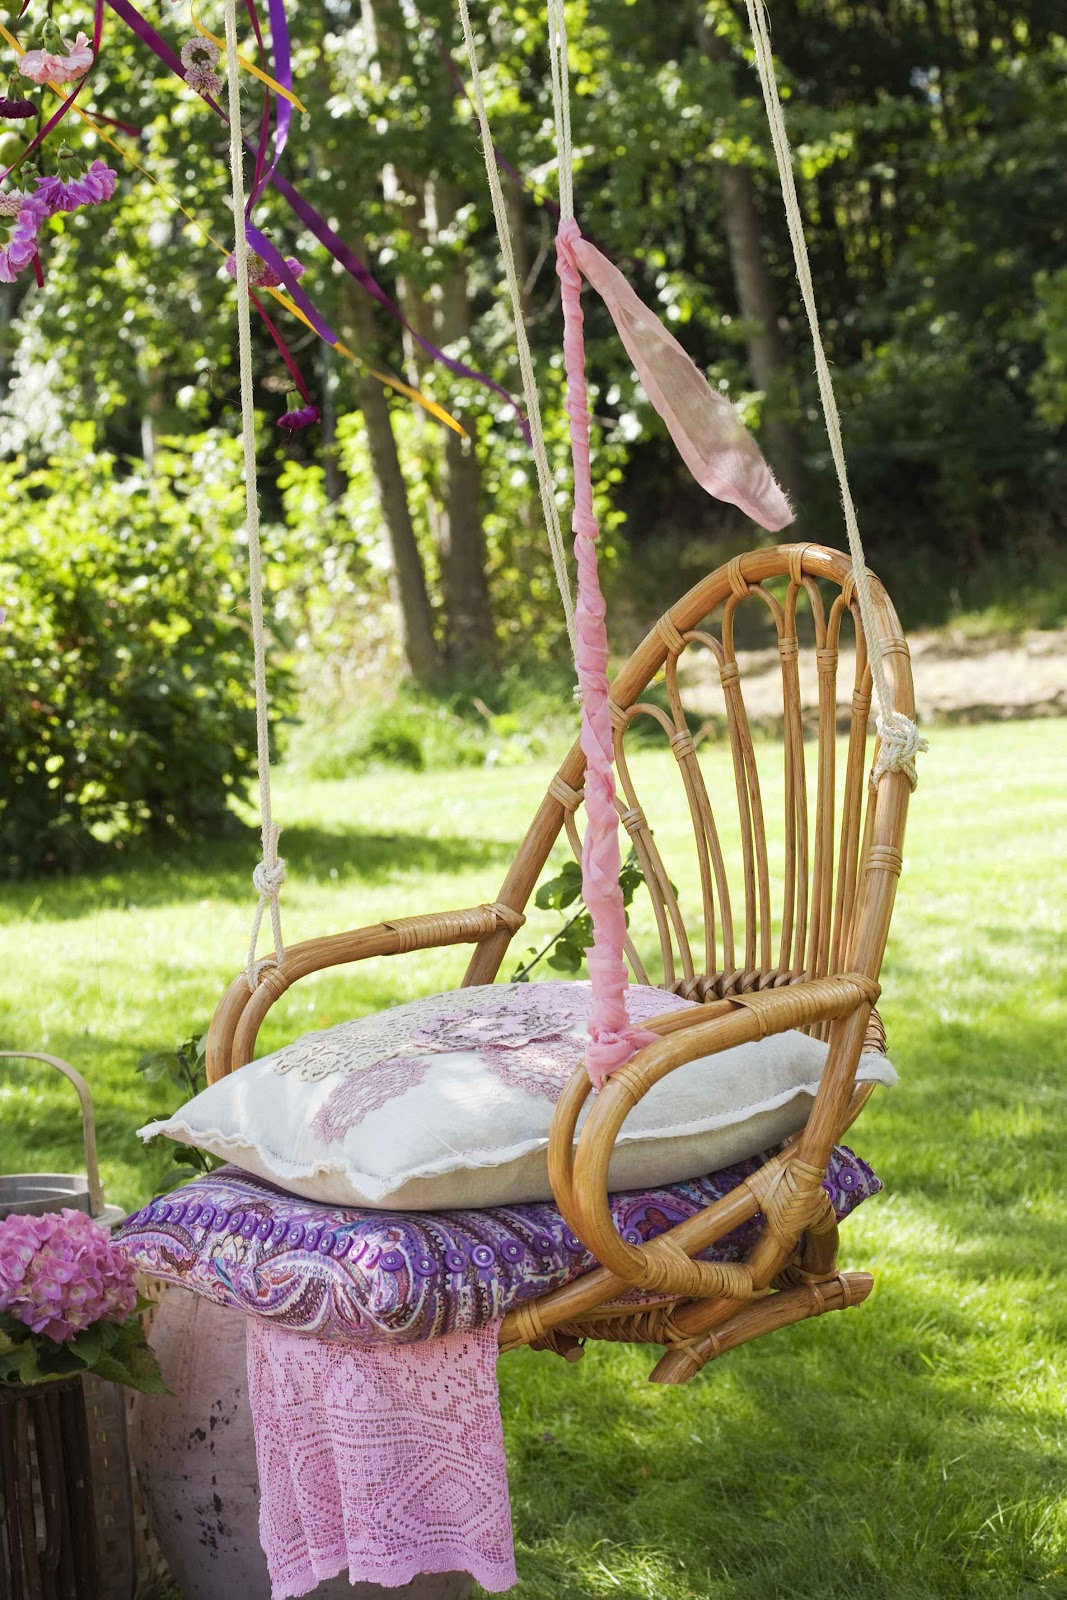 15 Awesome Ways To Repurpose Old Chairs Into Useful Items